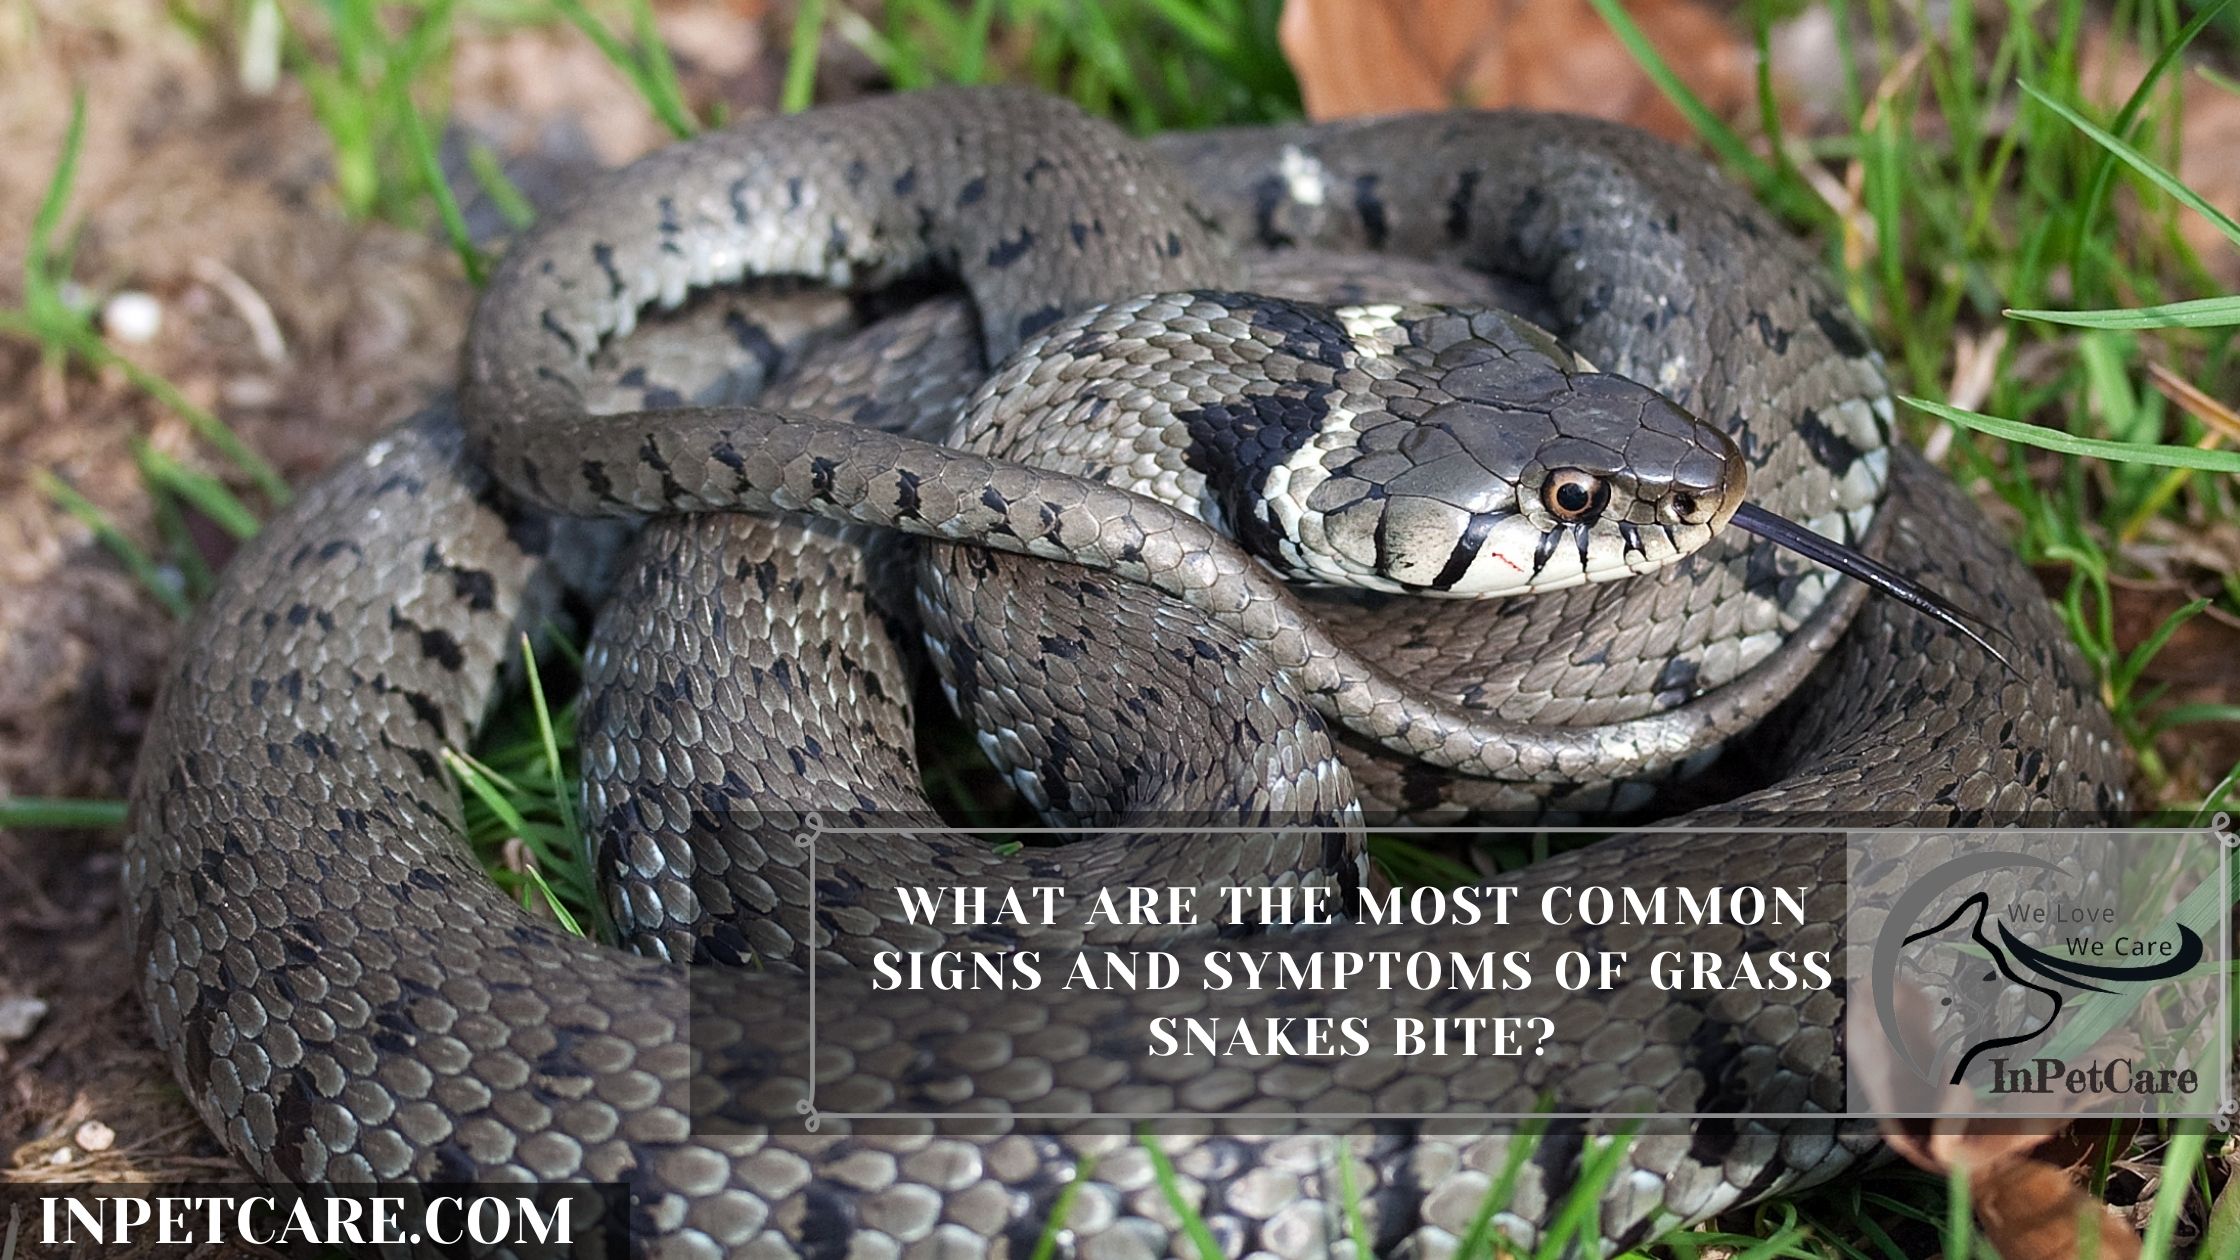 What Are The Most Common Signs And Symptoms Of Grass Snakes Bite?